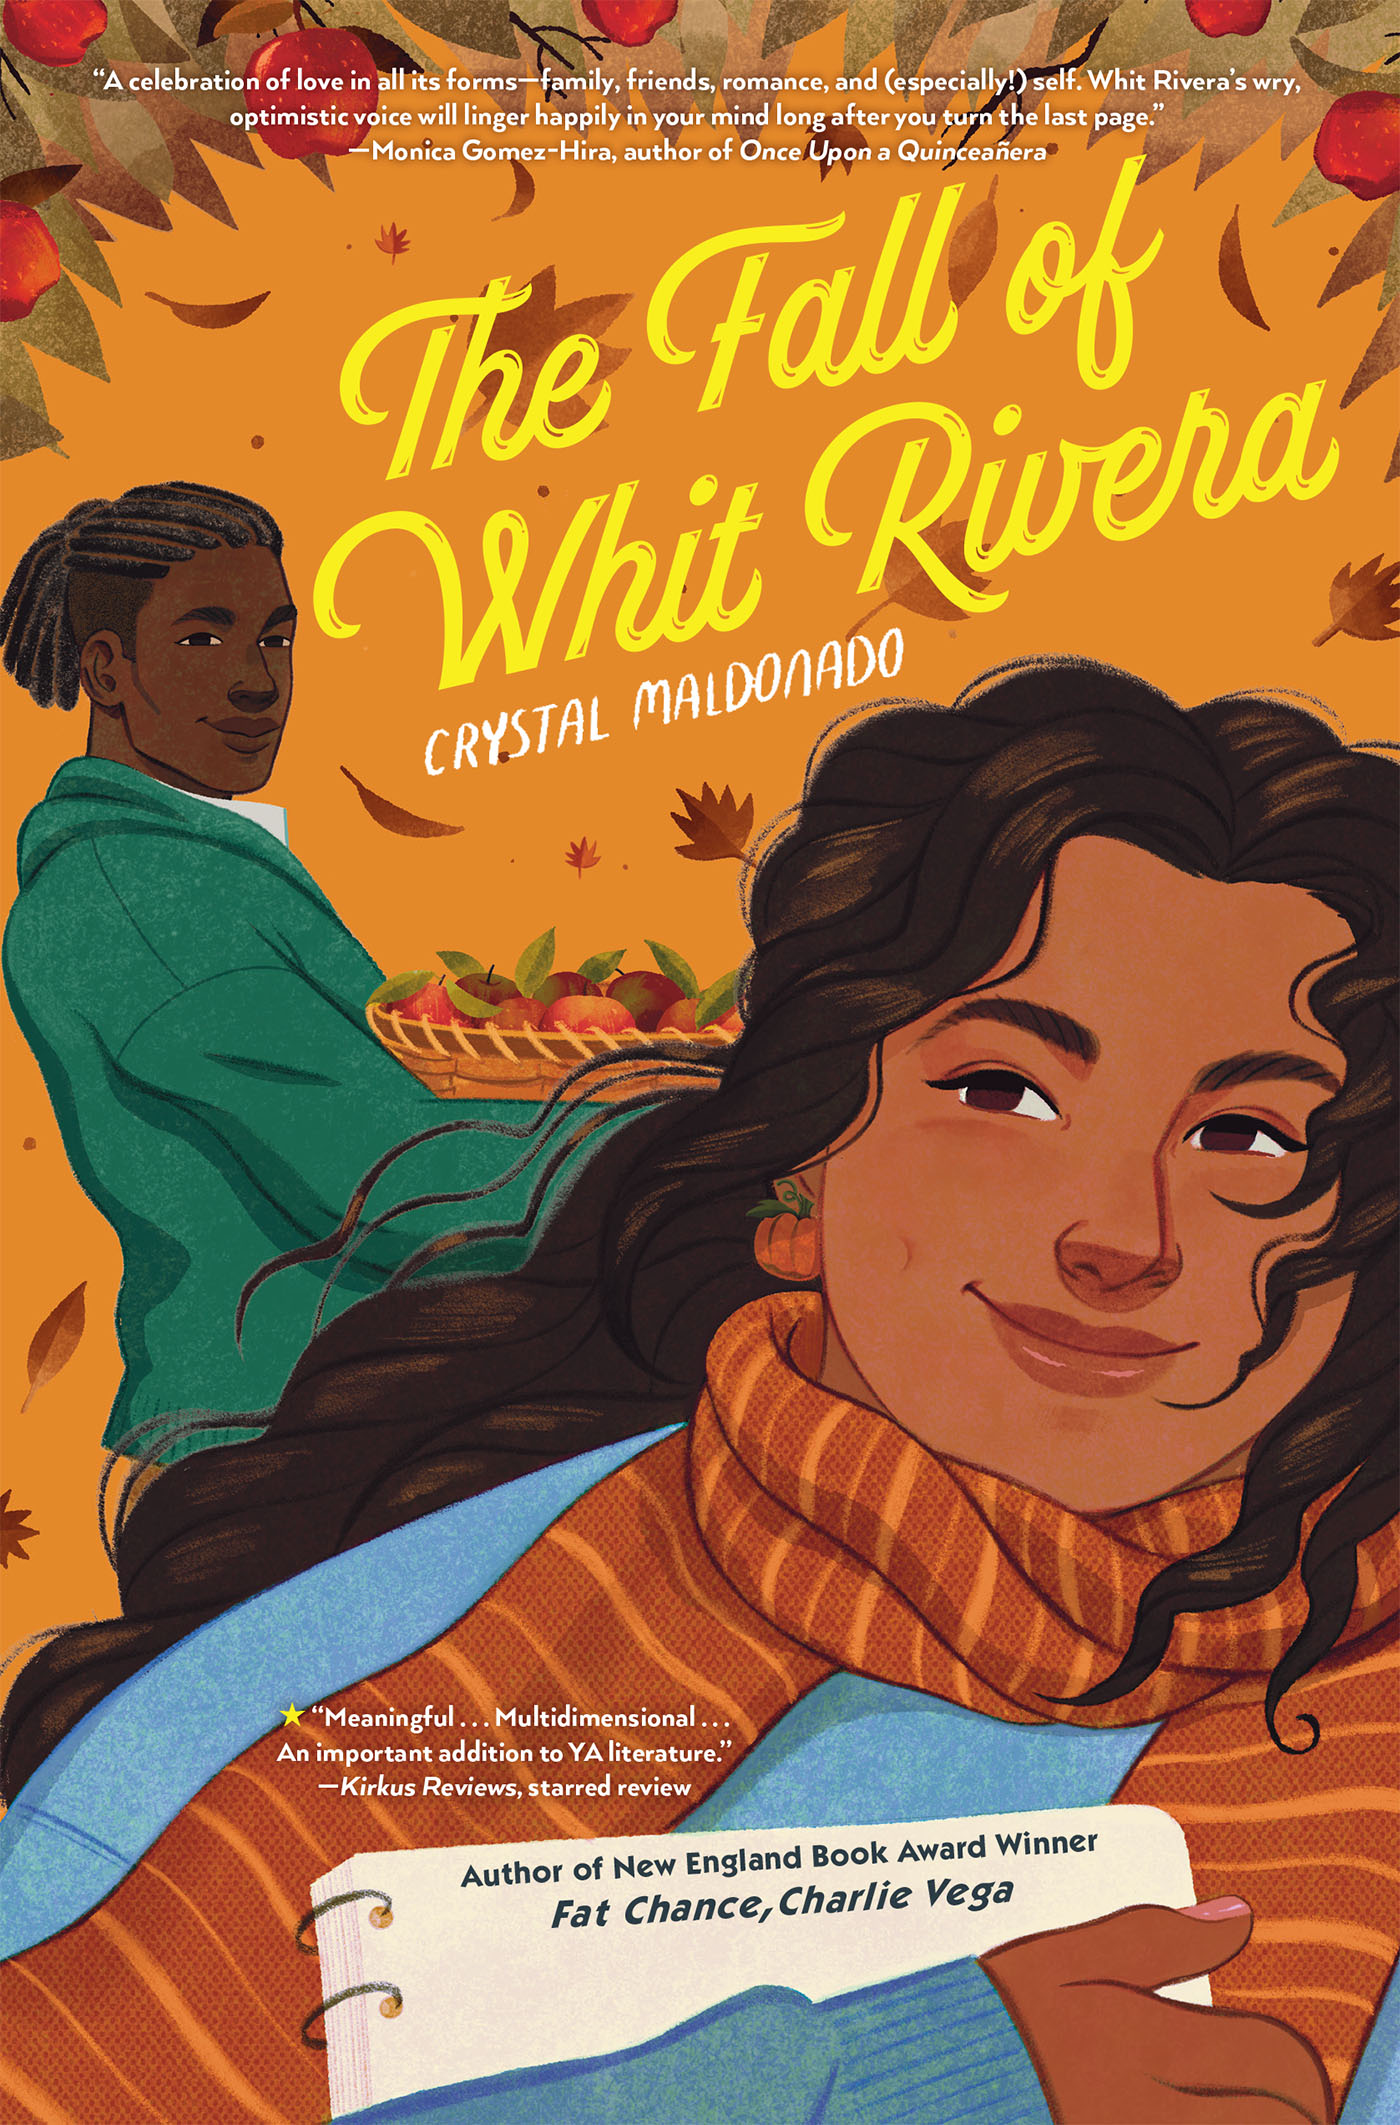 The cover of Crystal Maldonado's book, "The Fall of Whit Rivera."